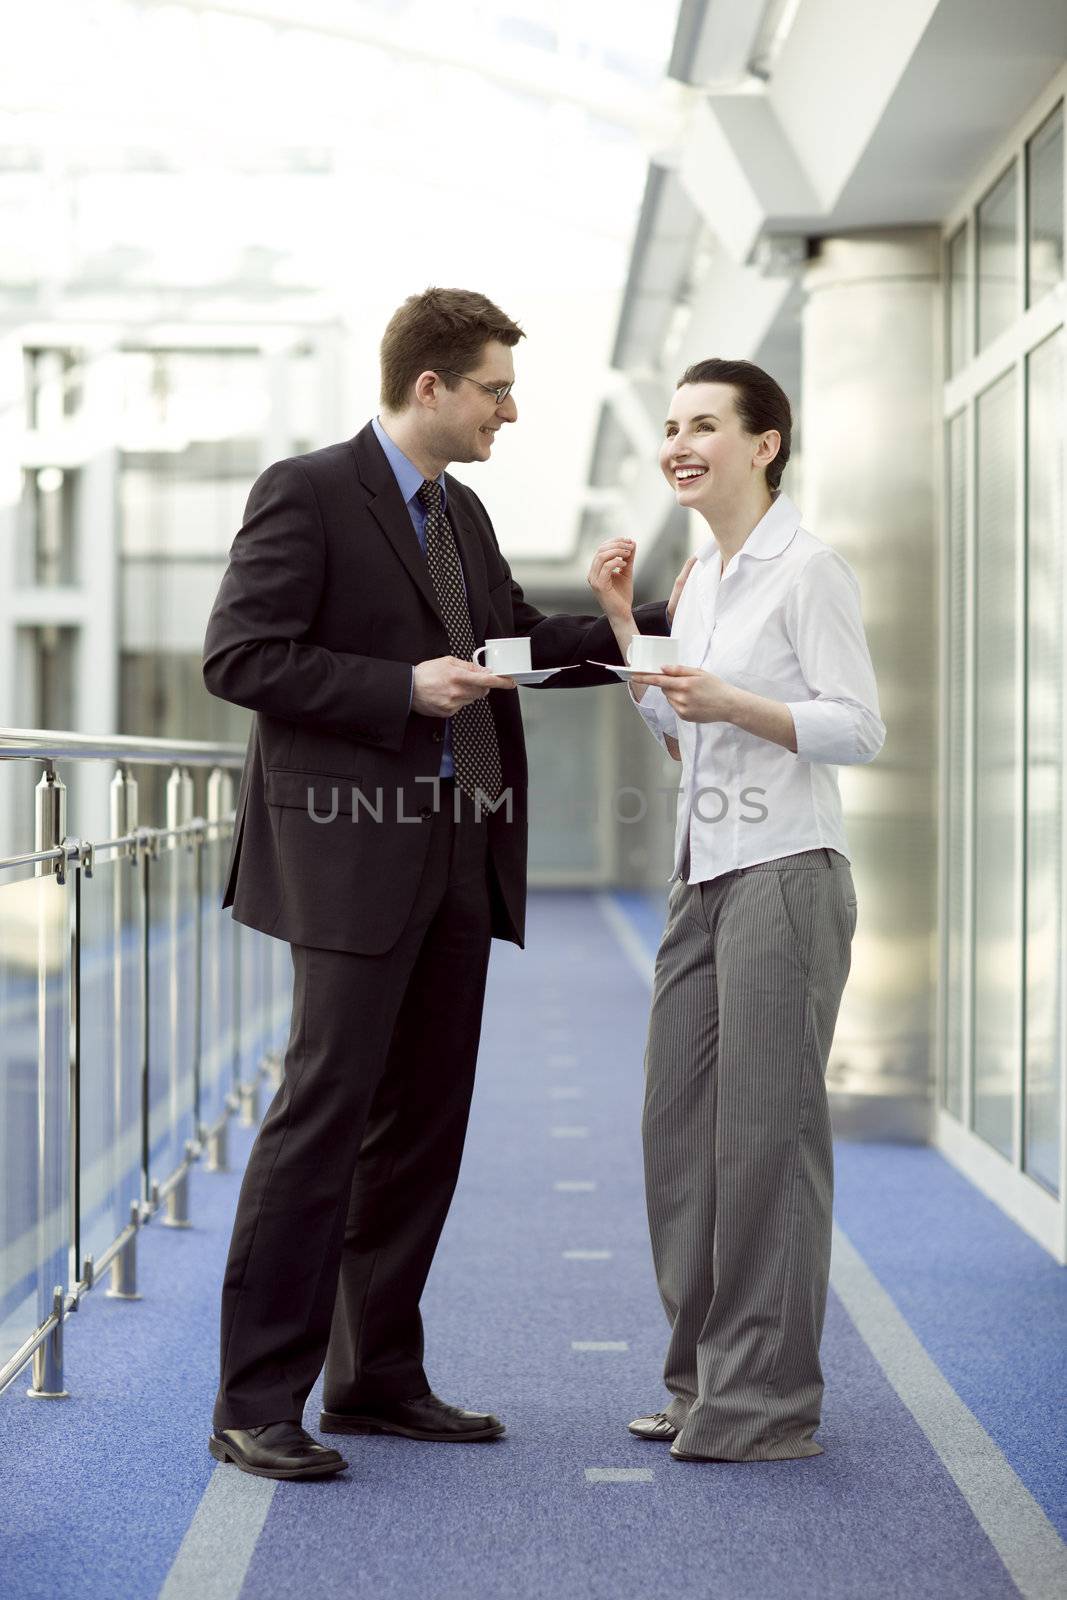 Business couple portrait - young man and woman having coffe on modern office corridor